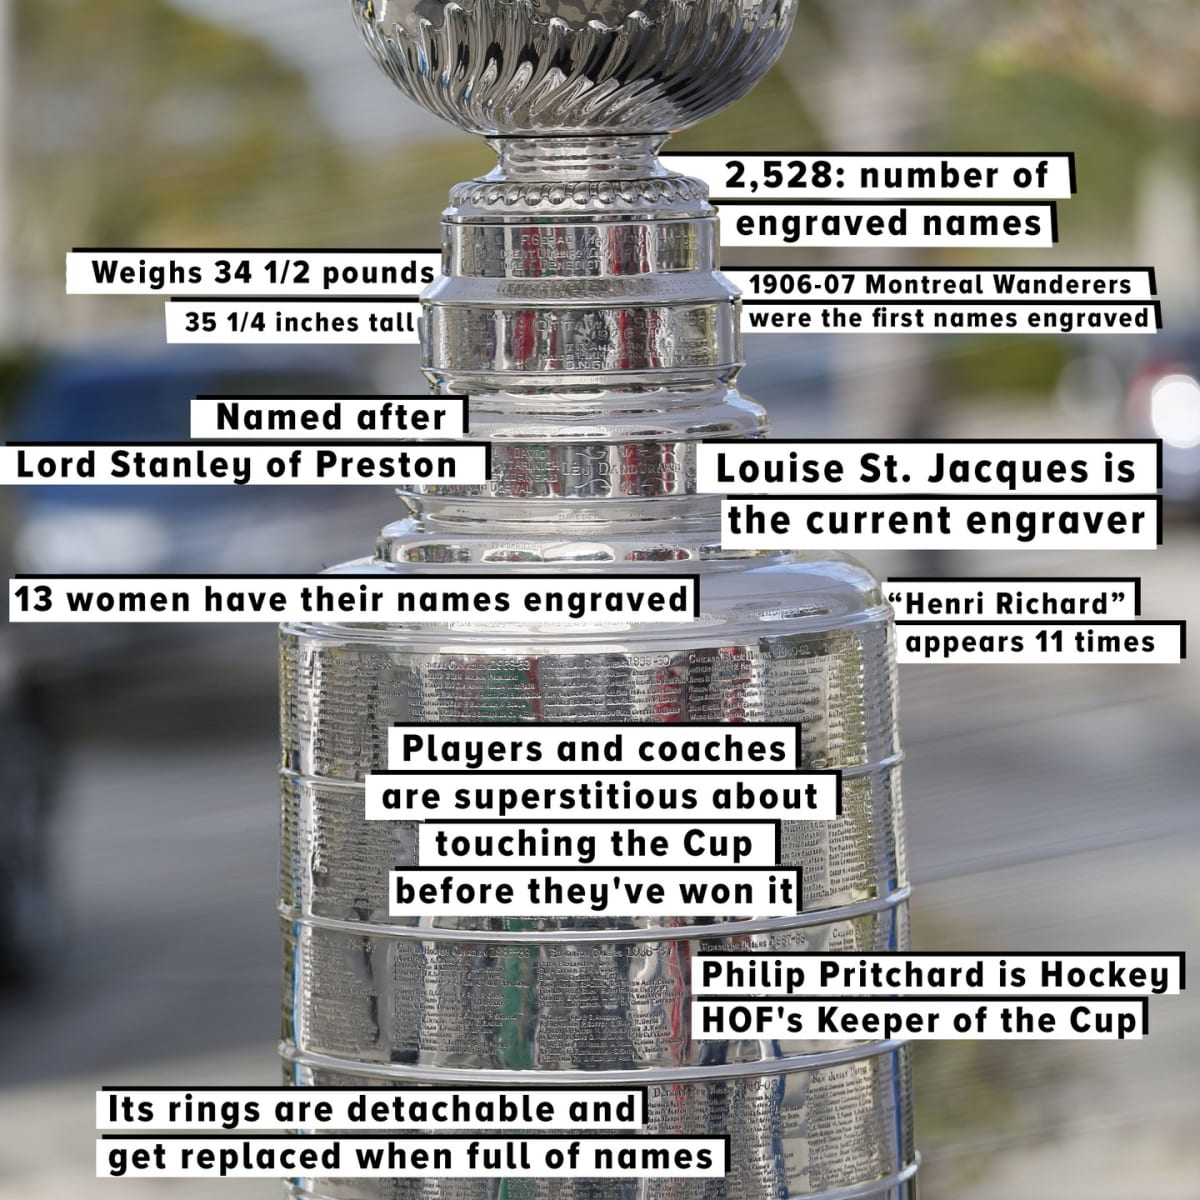 Stanley Cup: The Complete History